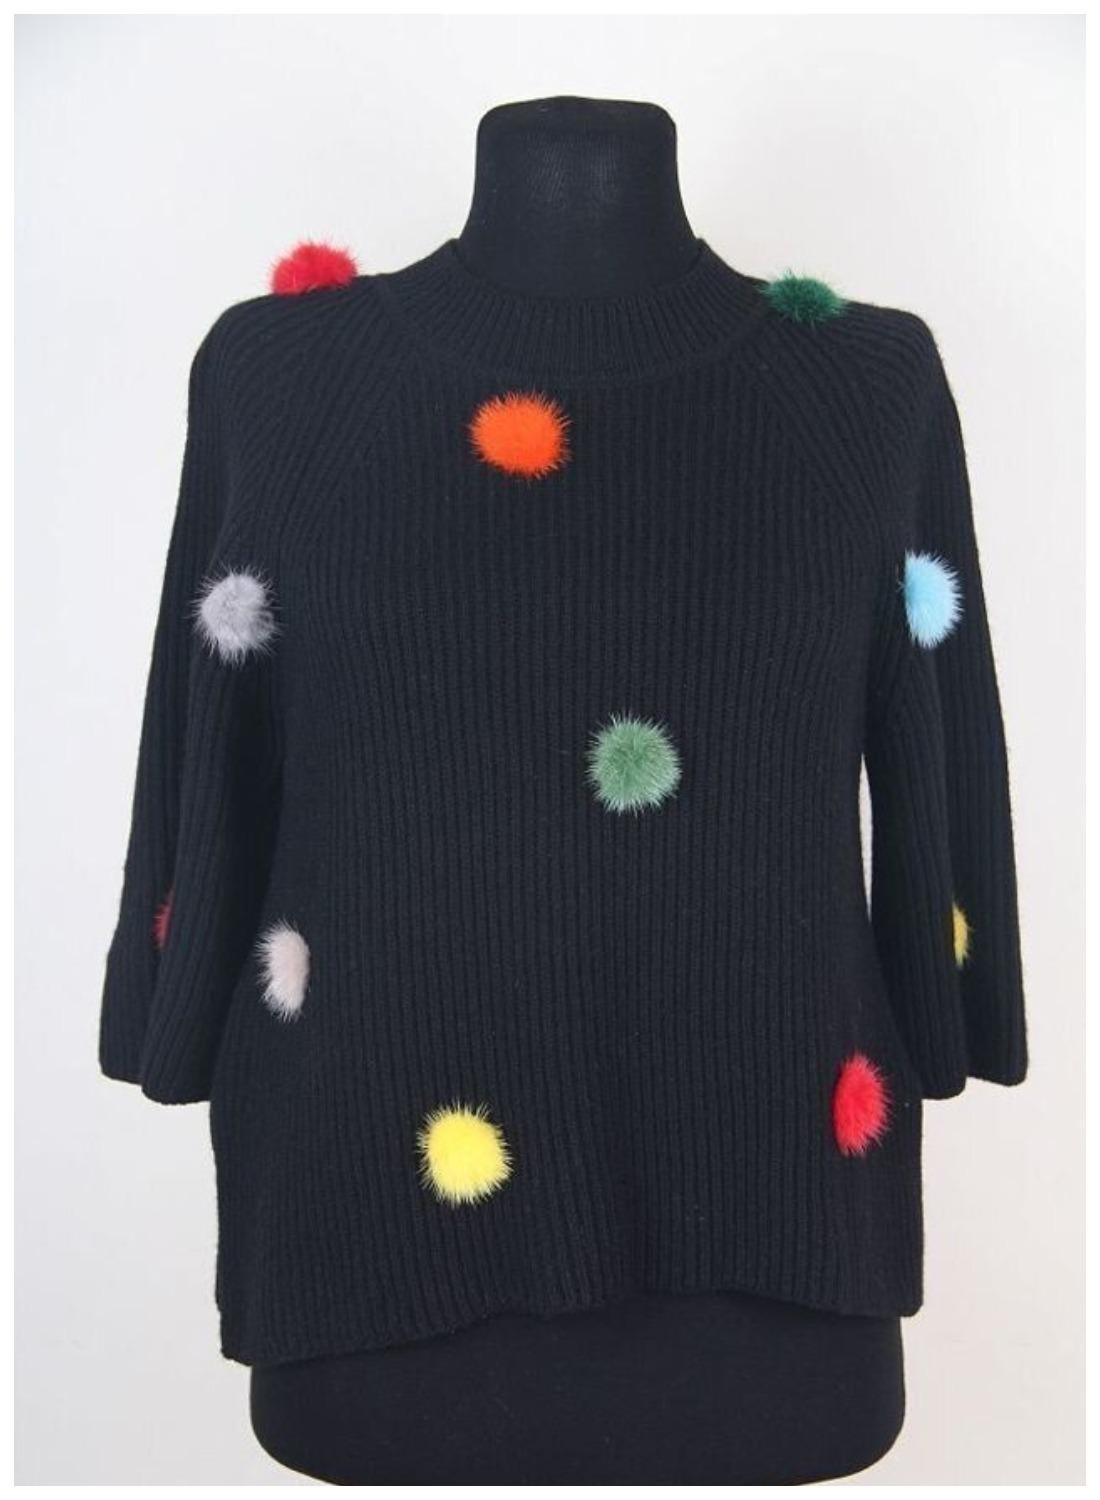 Fendi Black Cashmere Jumper with Mink Fur PomPoms US 2 

In the hands of Fendi, even the most classic things are reinterpreted. Take, for example, this black sweater; it's fitted, with a high collar and lots of rainbow-colored fur pom-poms on the